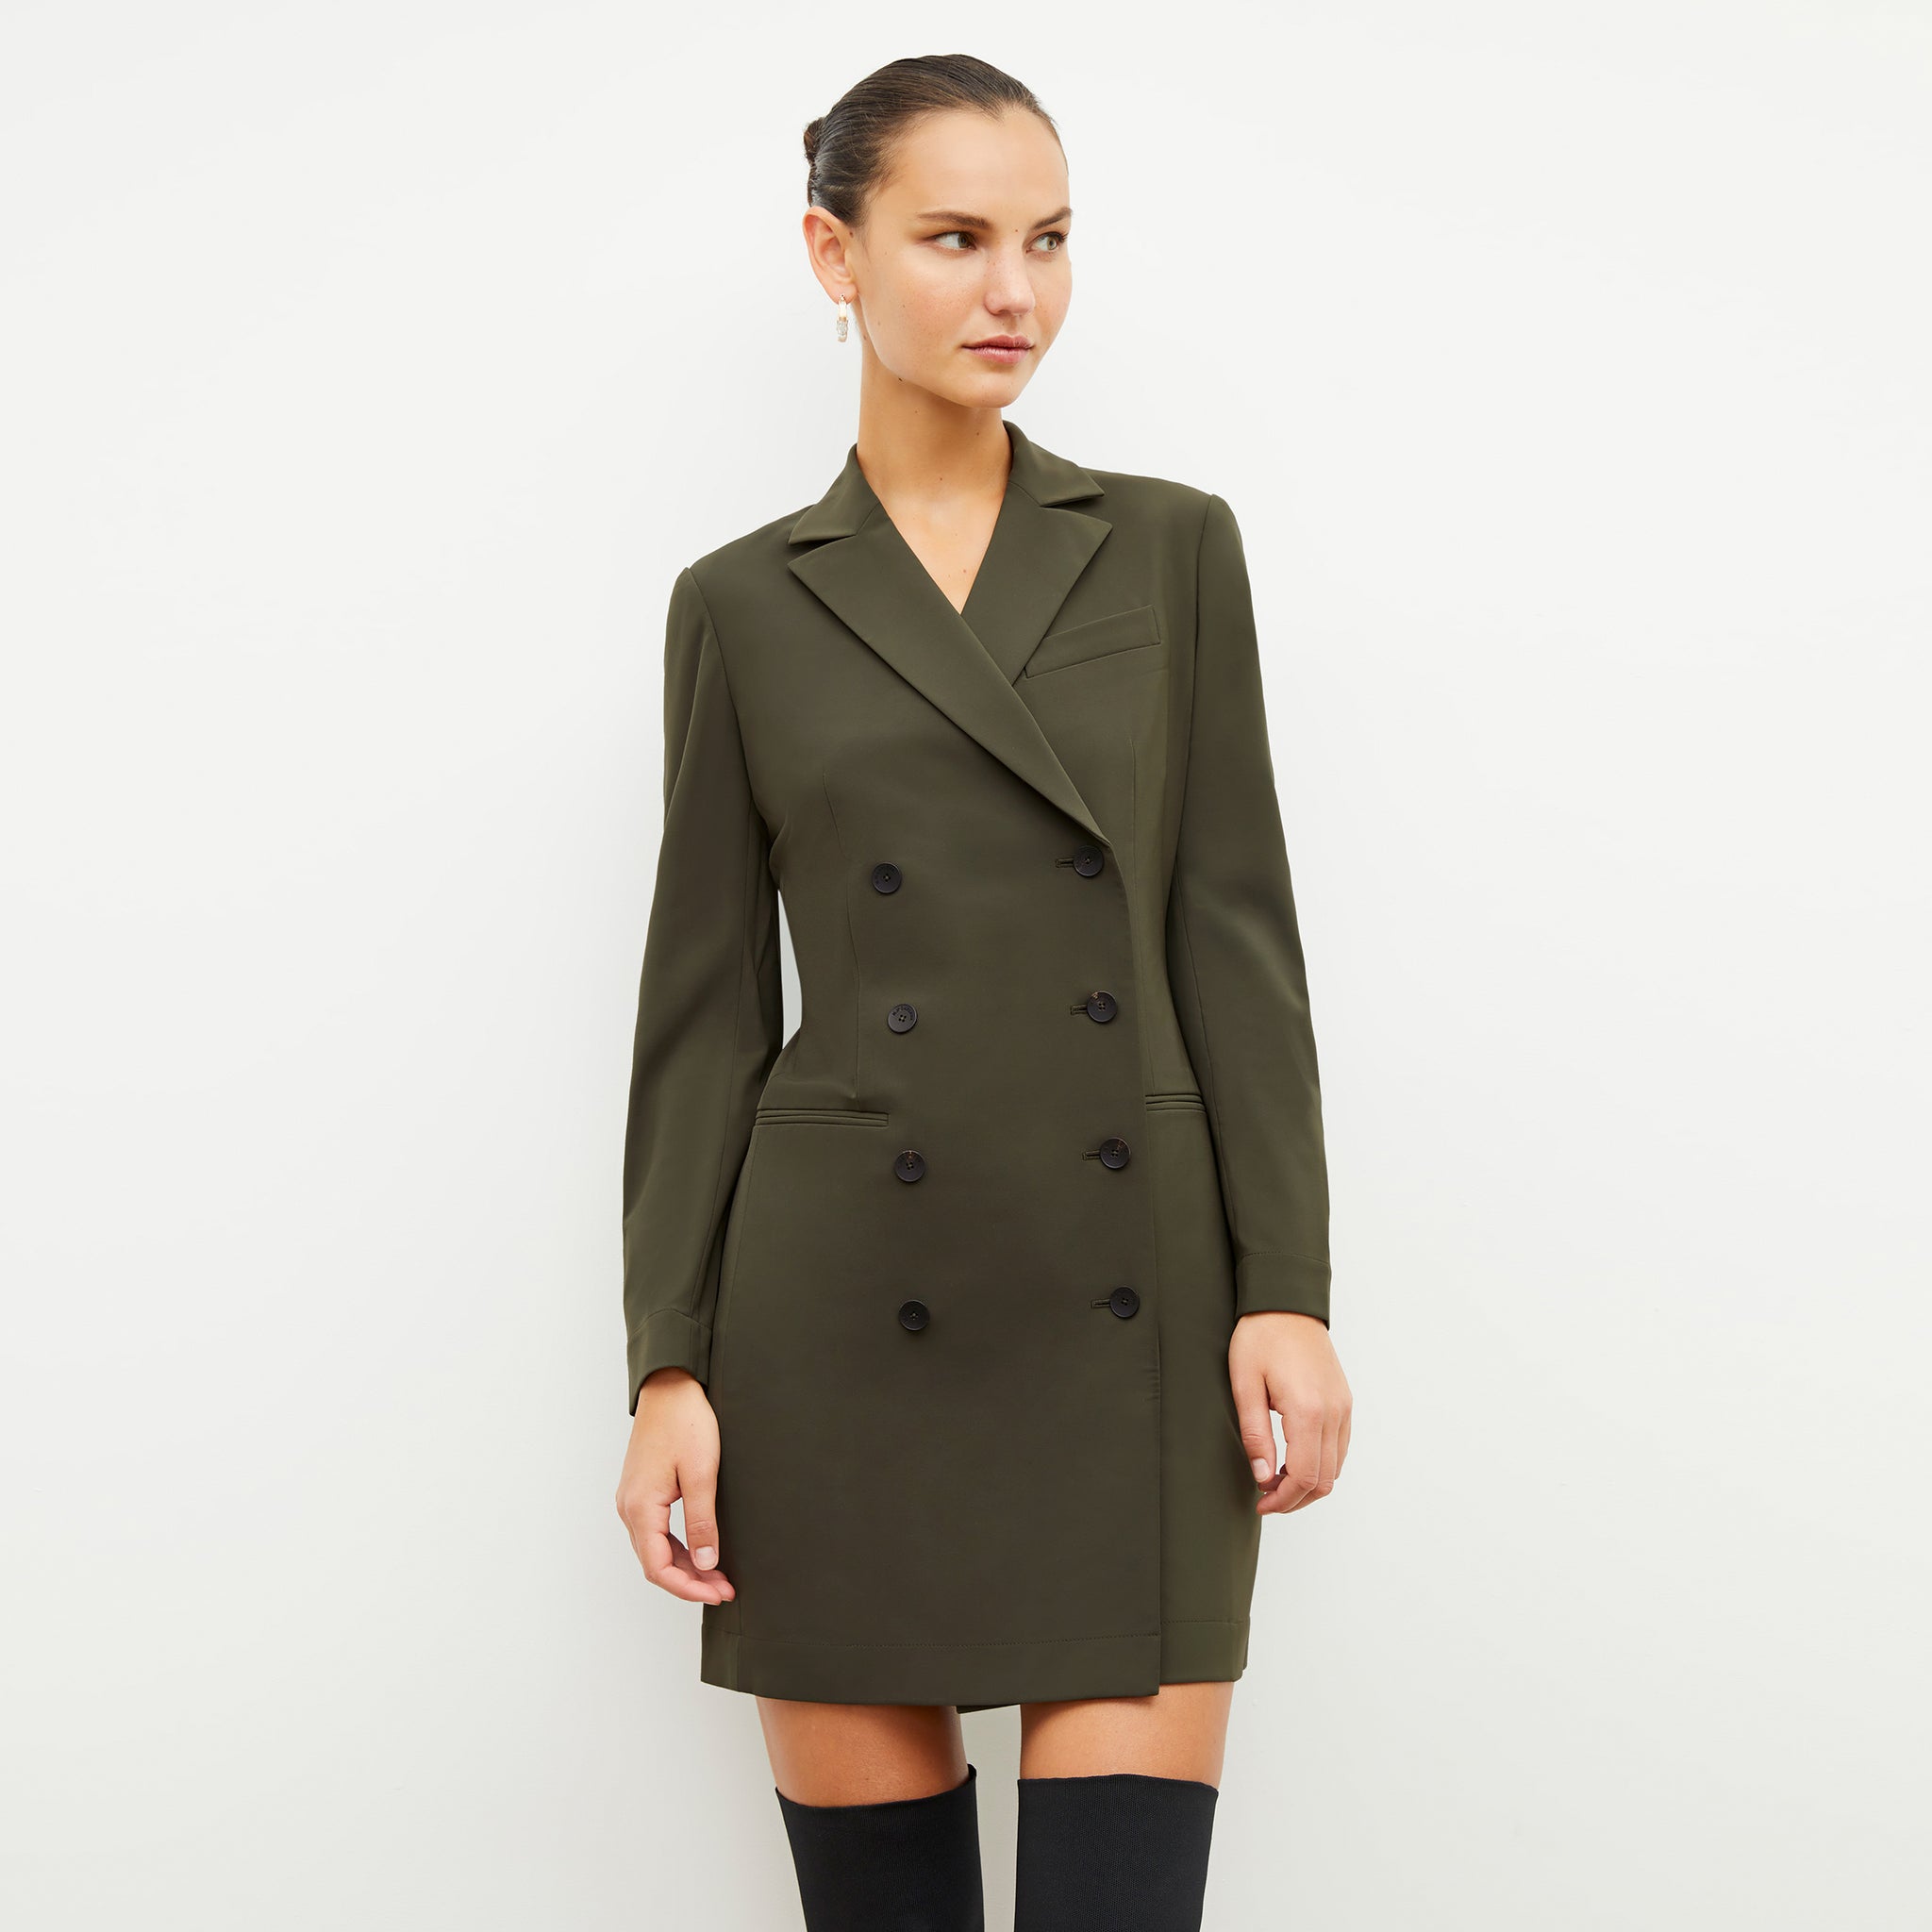 Front image of a woman wearing the gwynne dress in olive